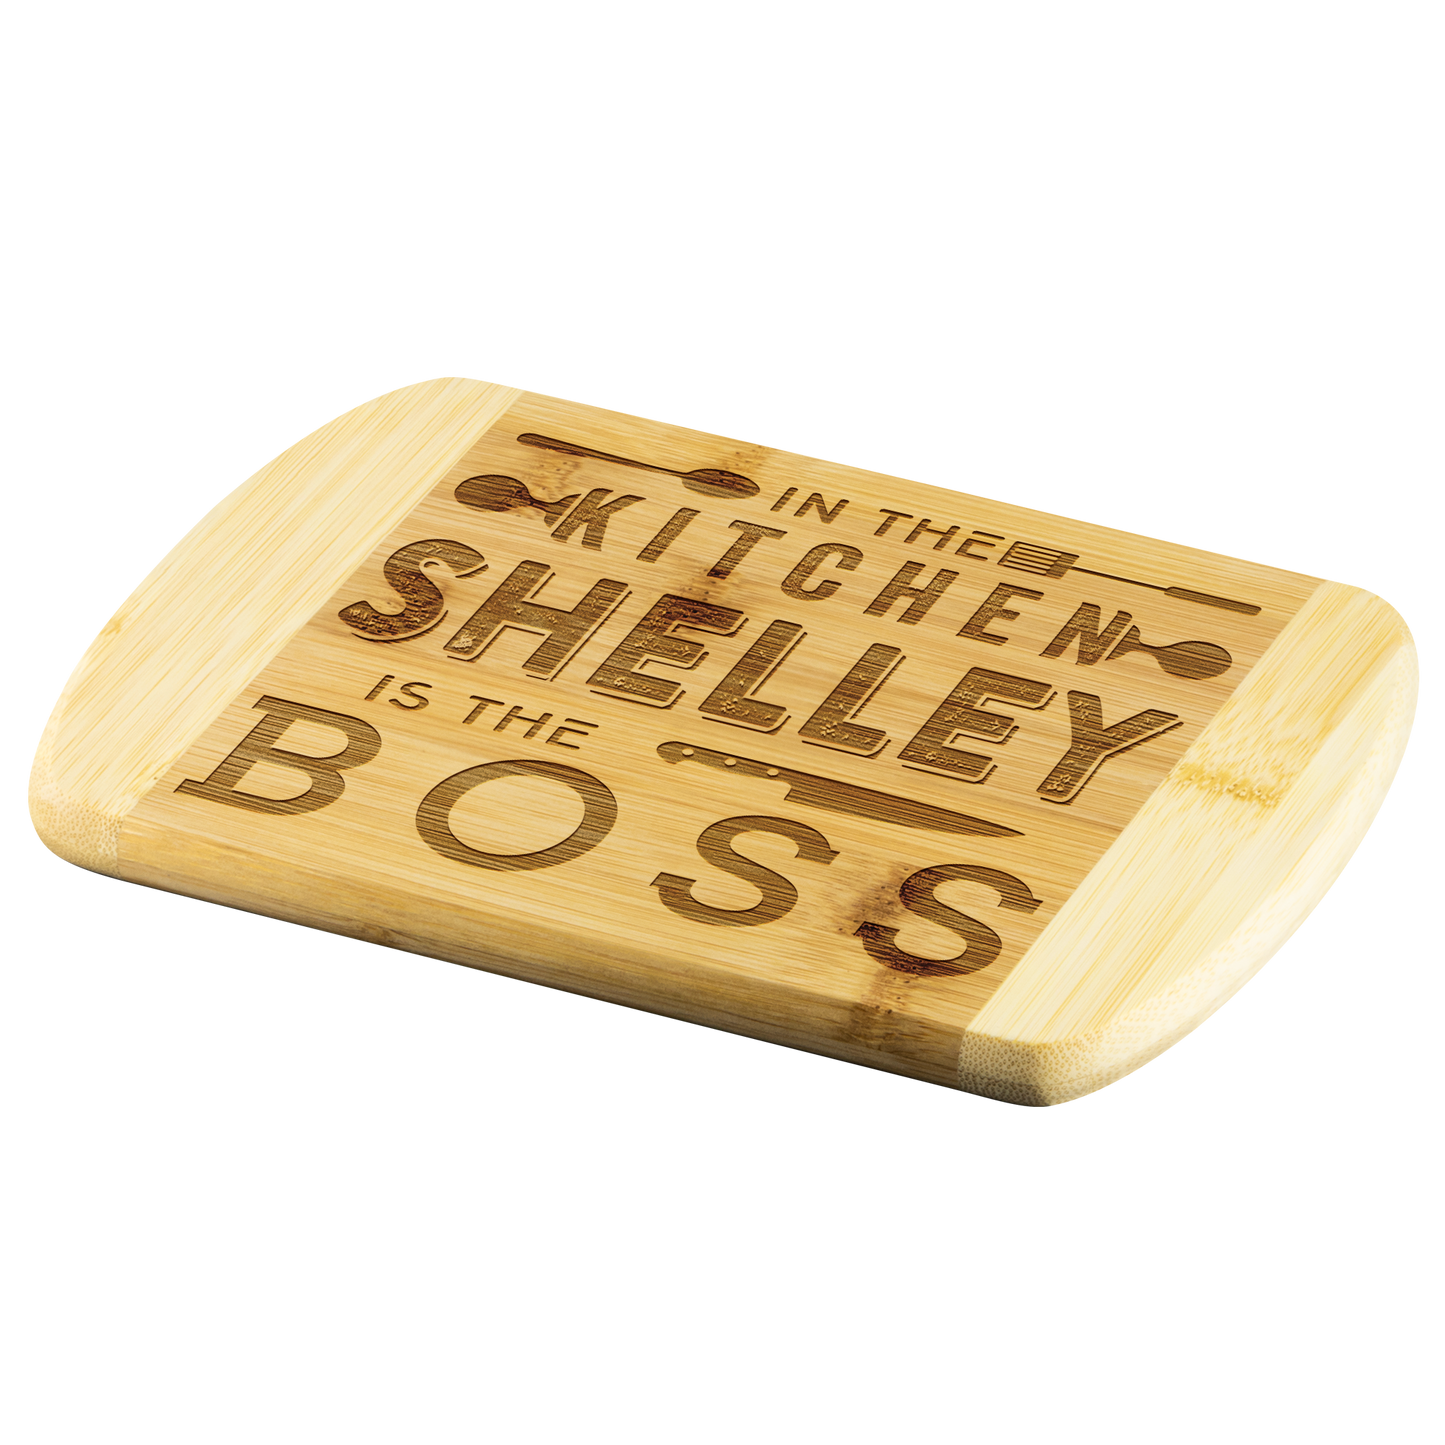 cub-20517121-sp-47374 - [ Shelley | 1 | 1 ] (TL_RoundEdgeWoodCuttingBoard) Mom To Be Gifts - In The Kitchen Shelley Is The Boss - Mothe